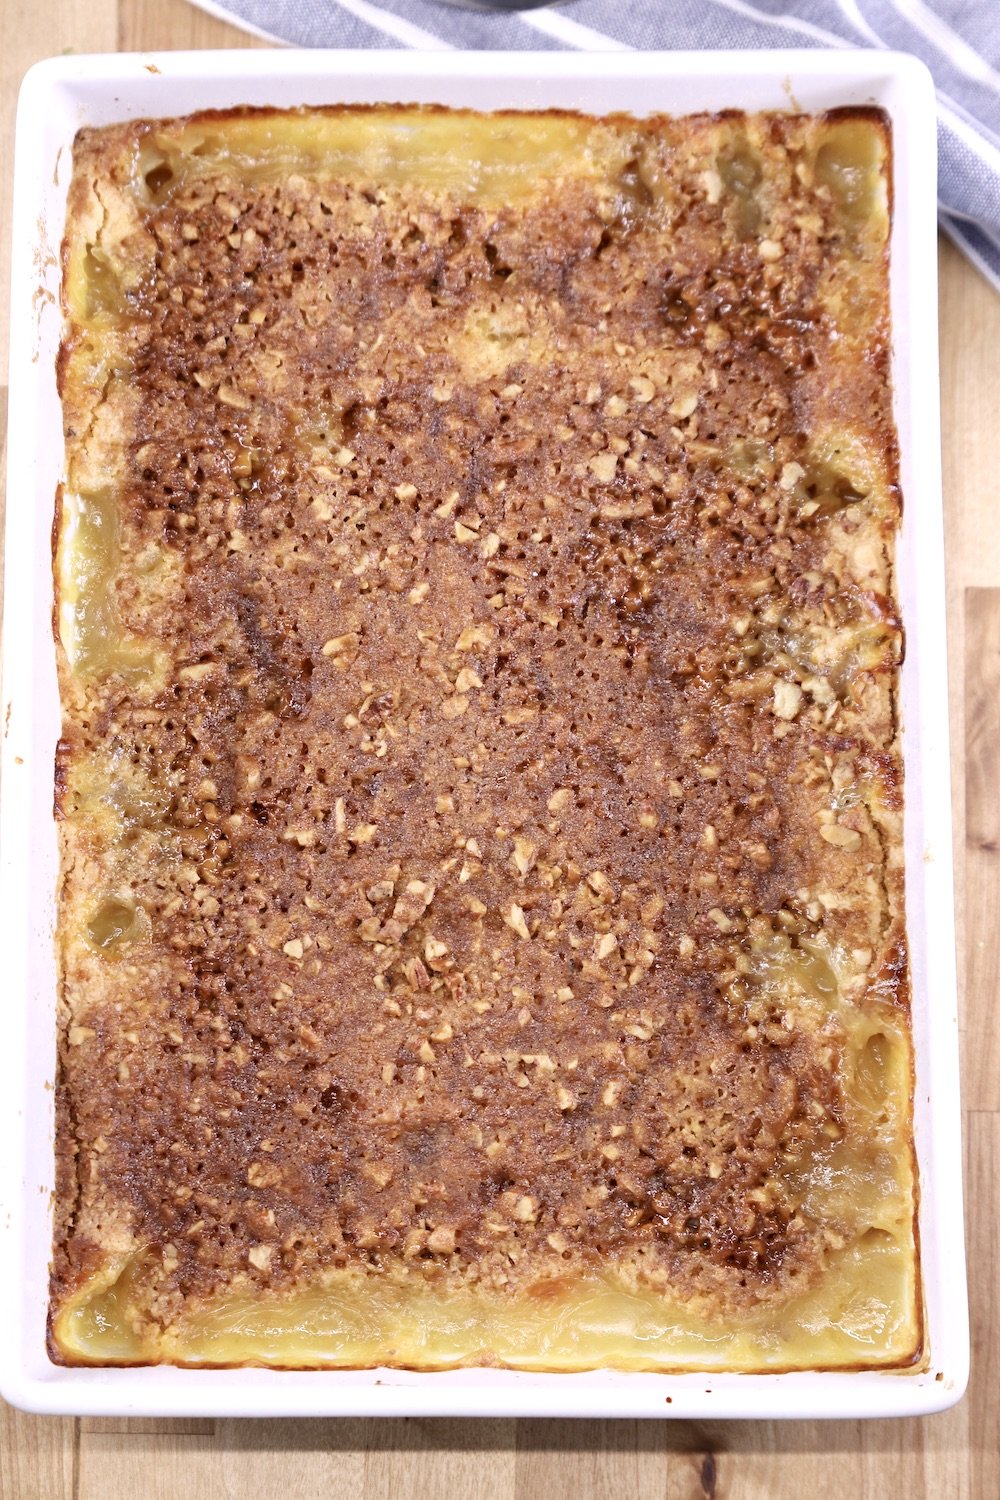 Baked pineapple dump cake with pecans and brown sugar